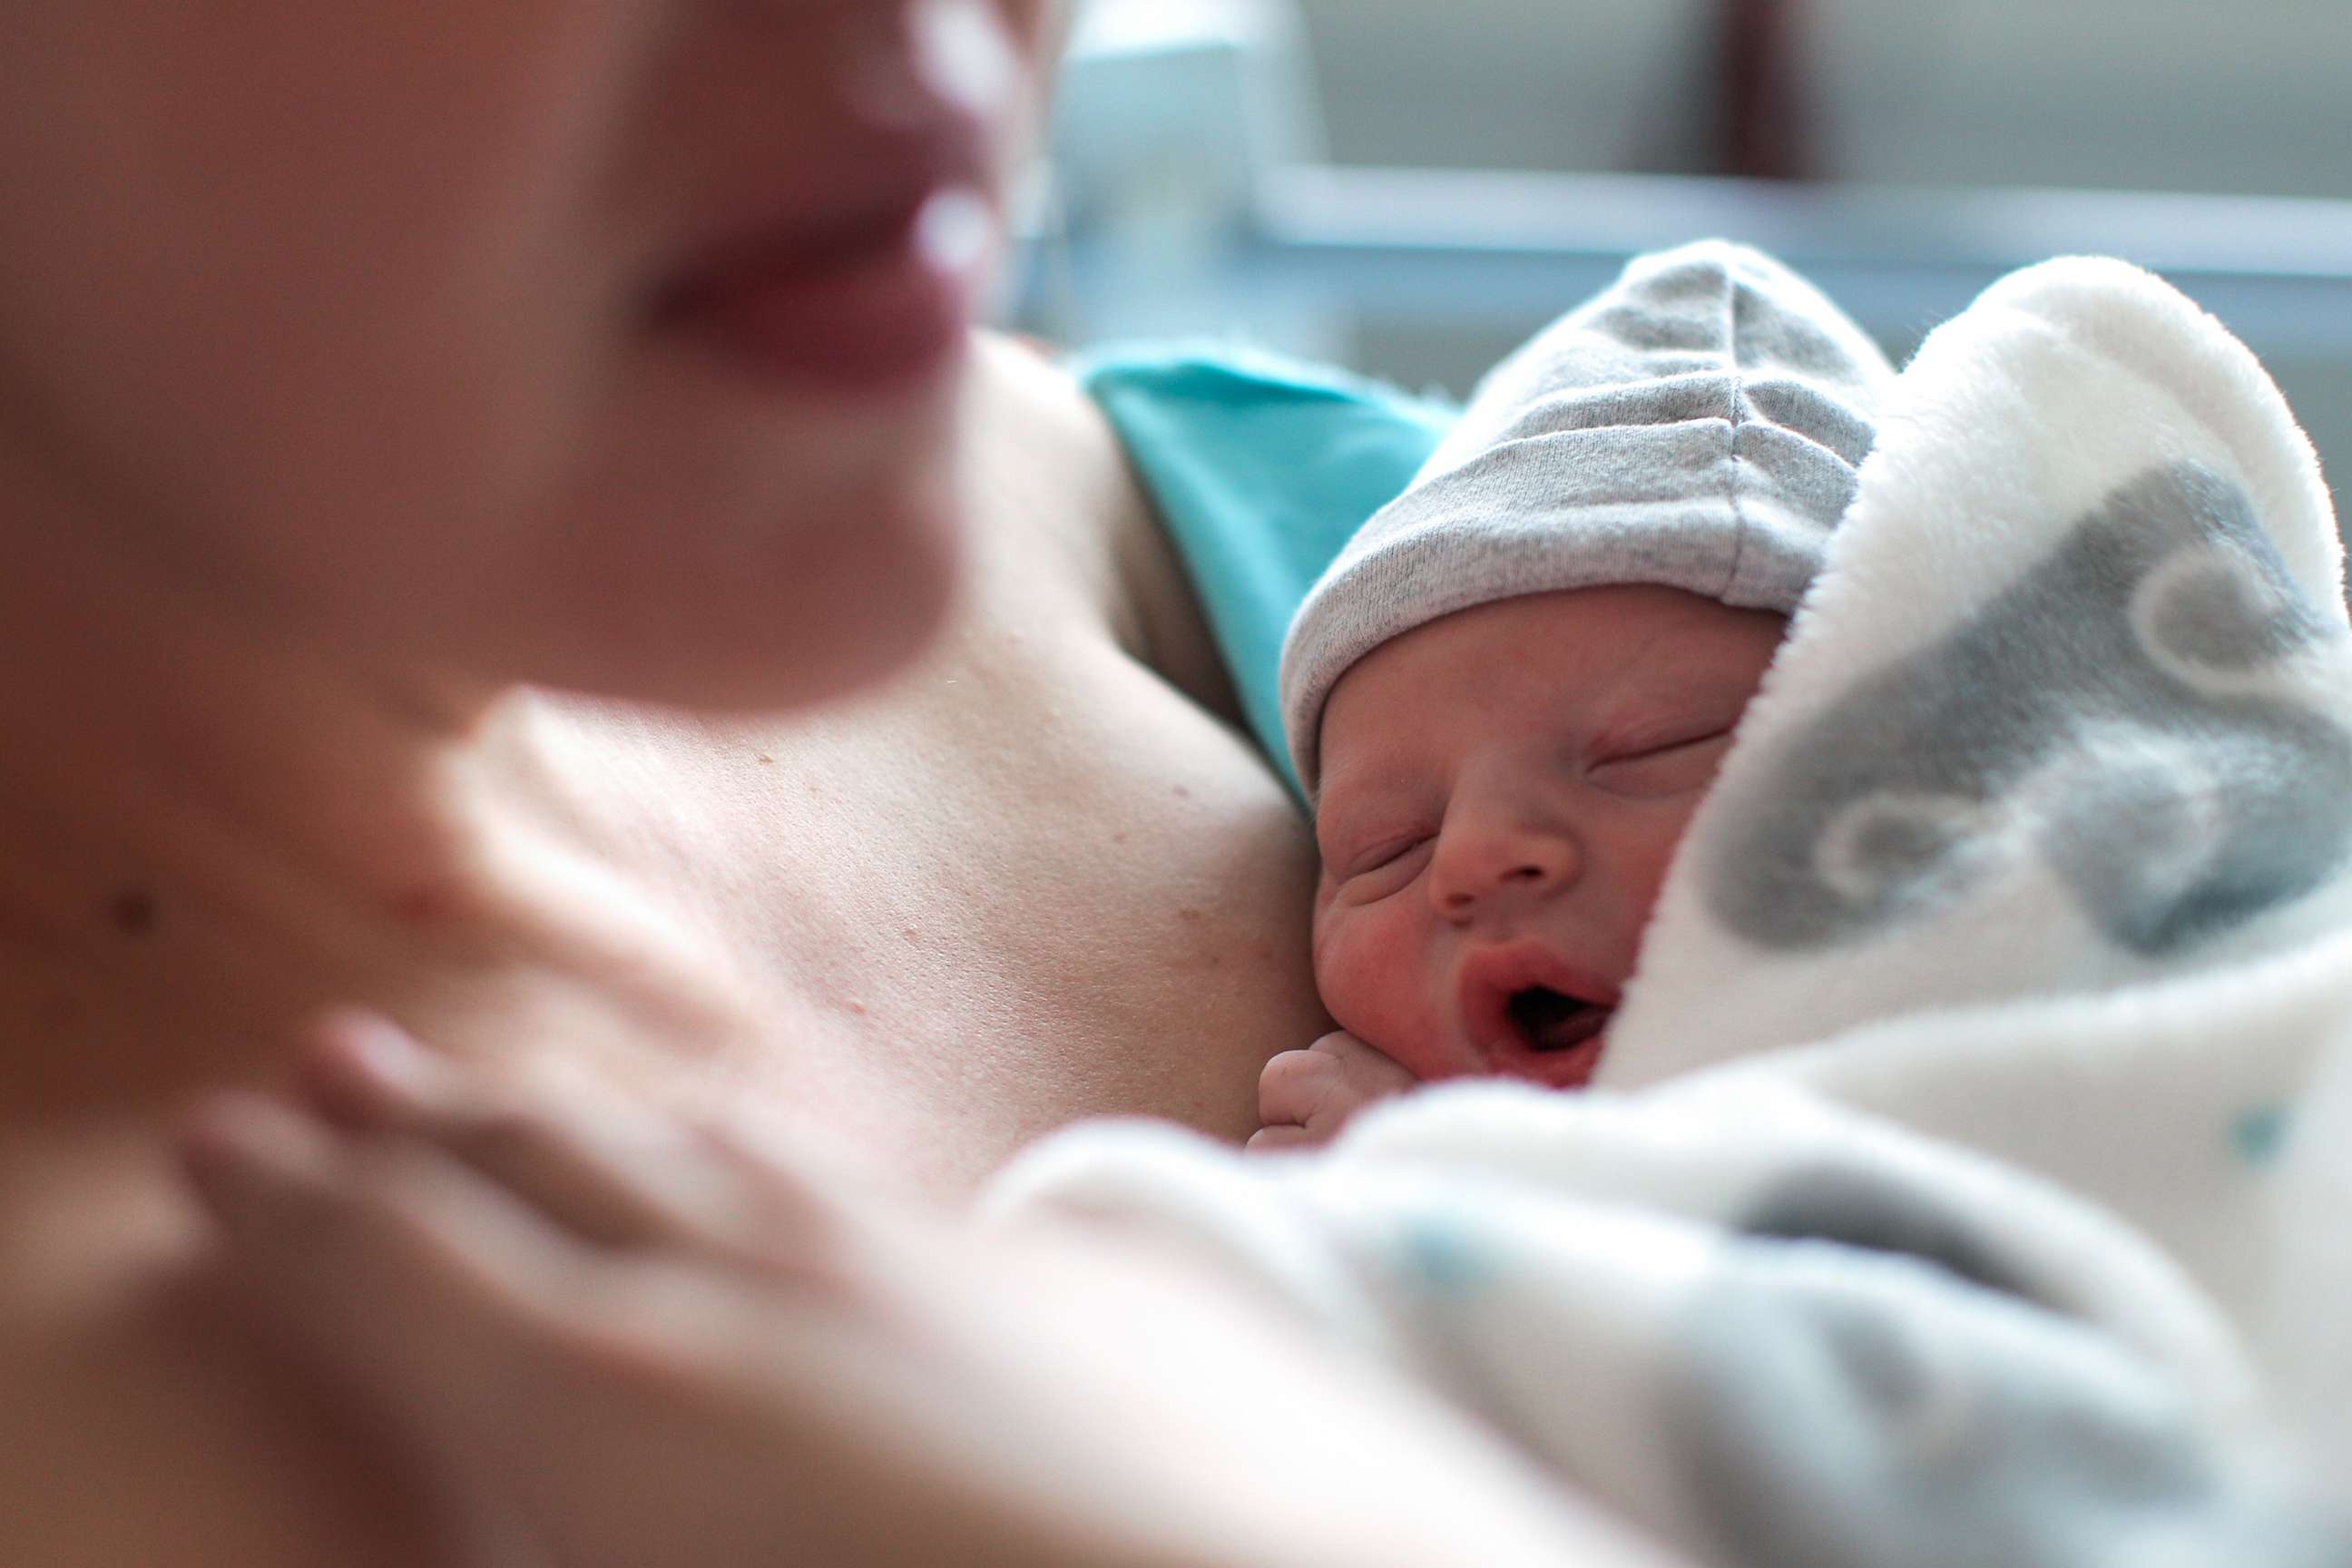 PHOTO: A newborn baby boy breastfeeding for the first time at a hospital.